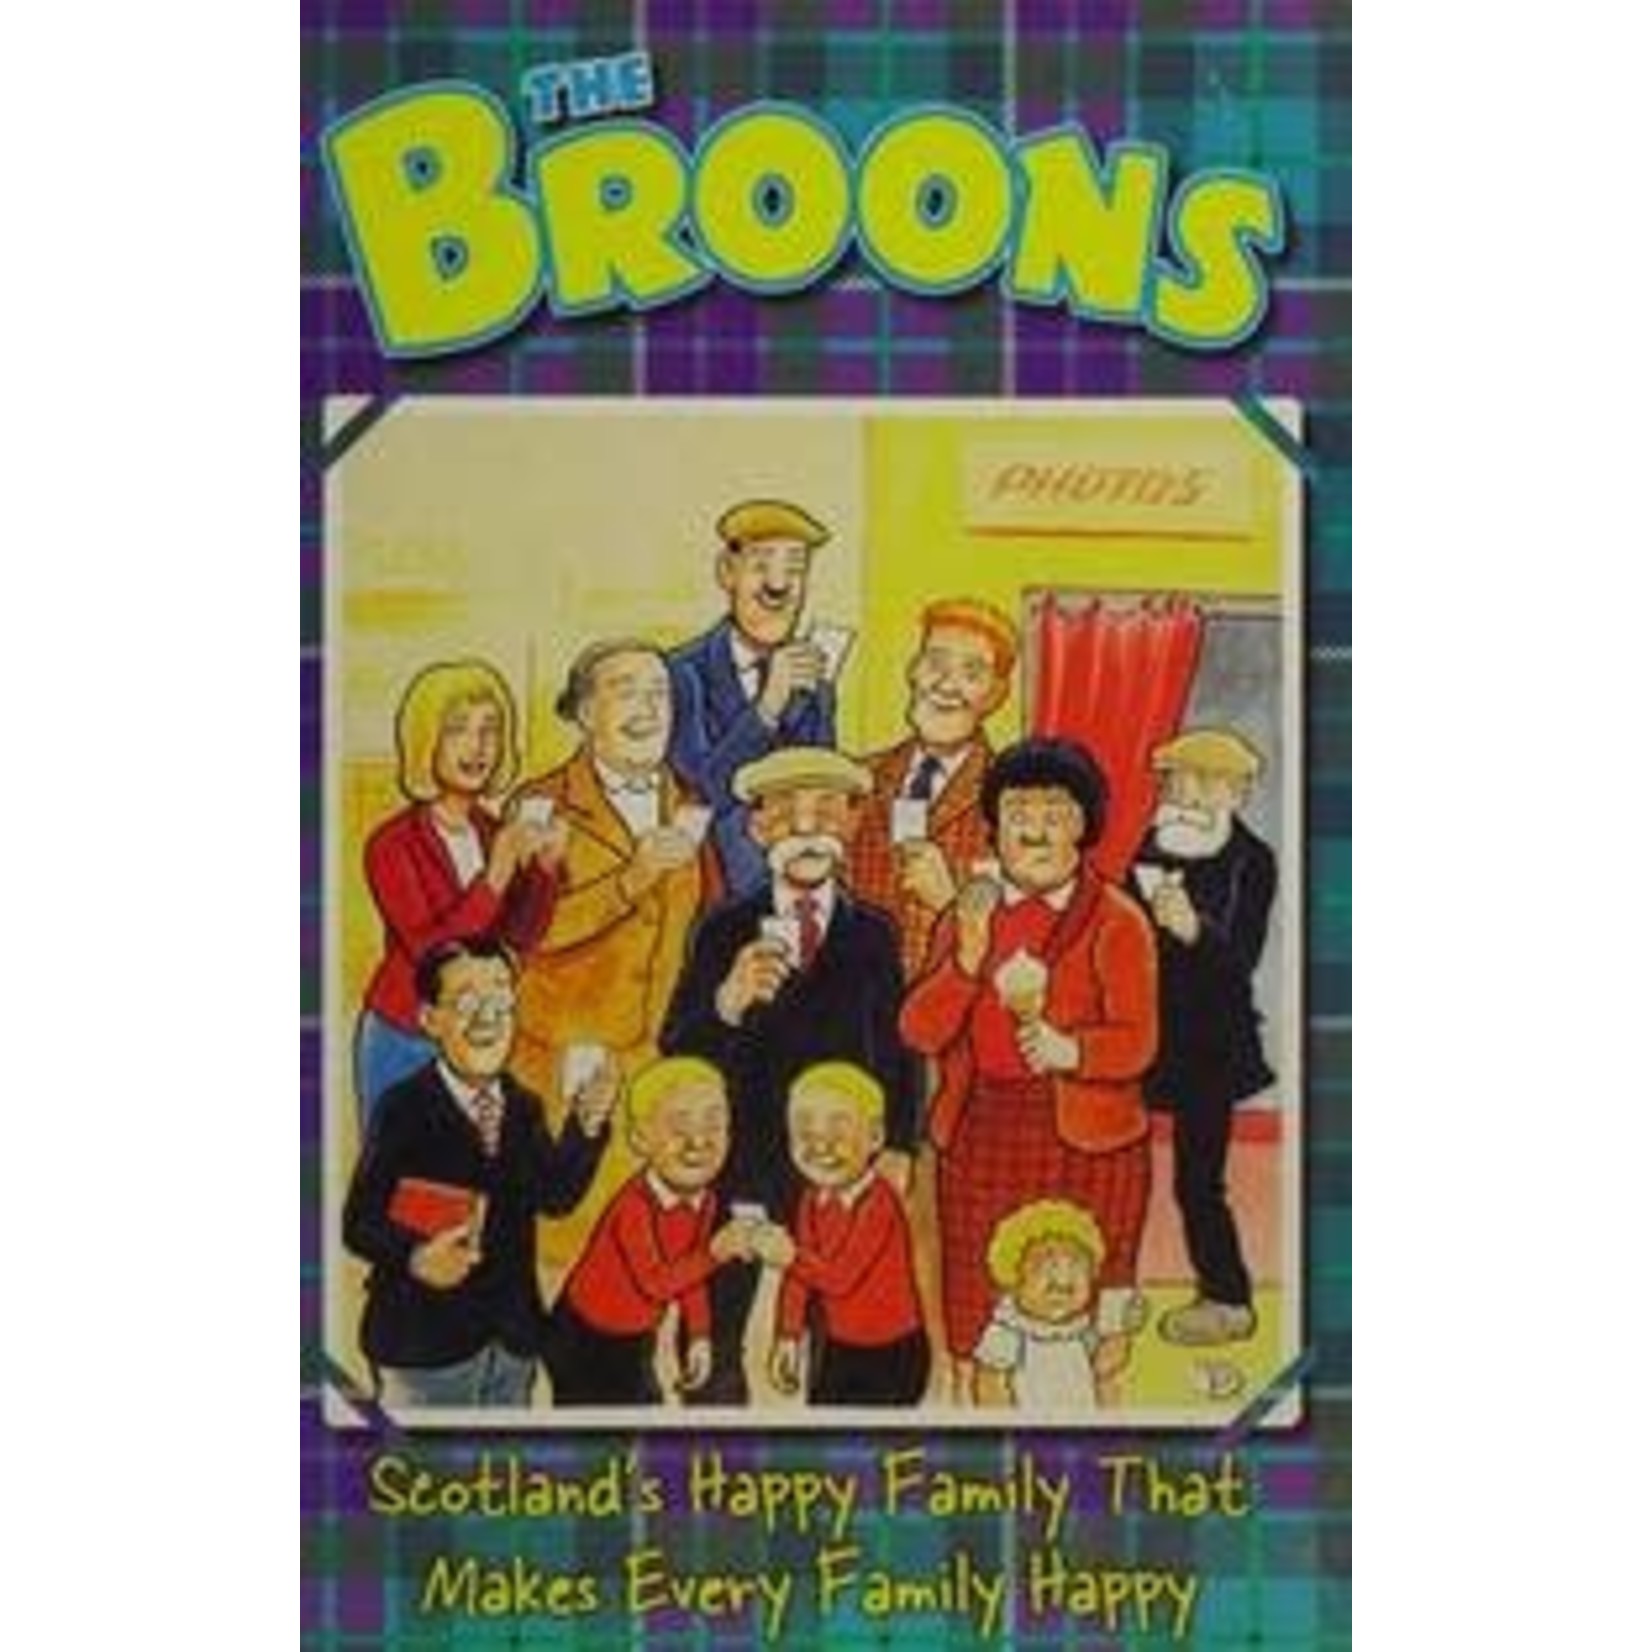 The Broons - Scotland's Happy Family That Makes Every Family Happy